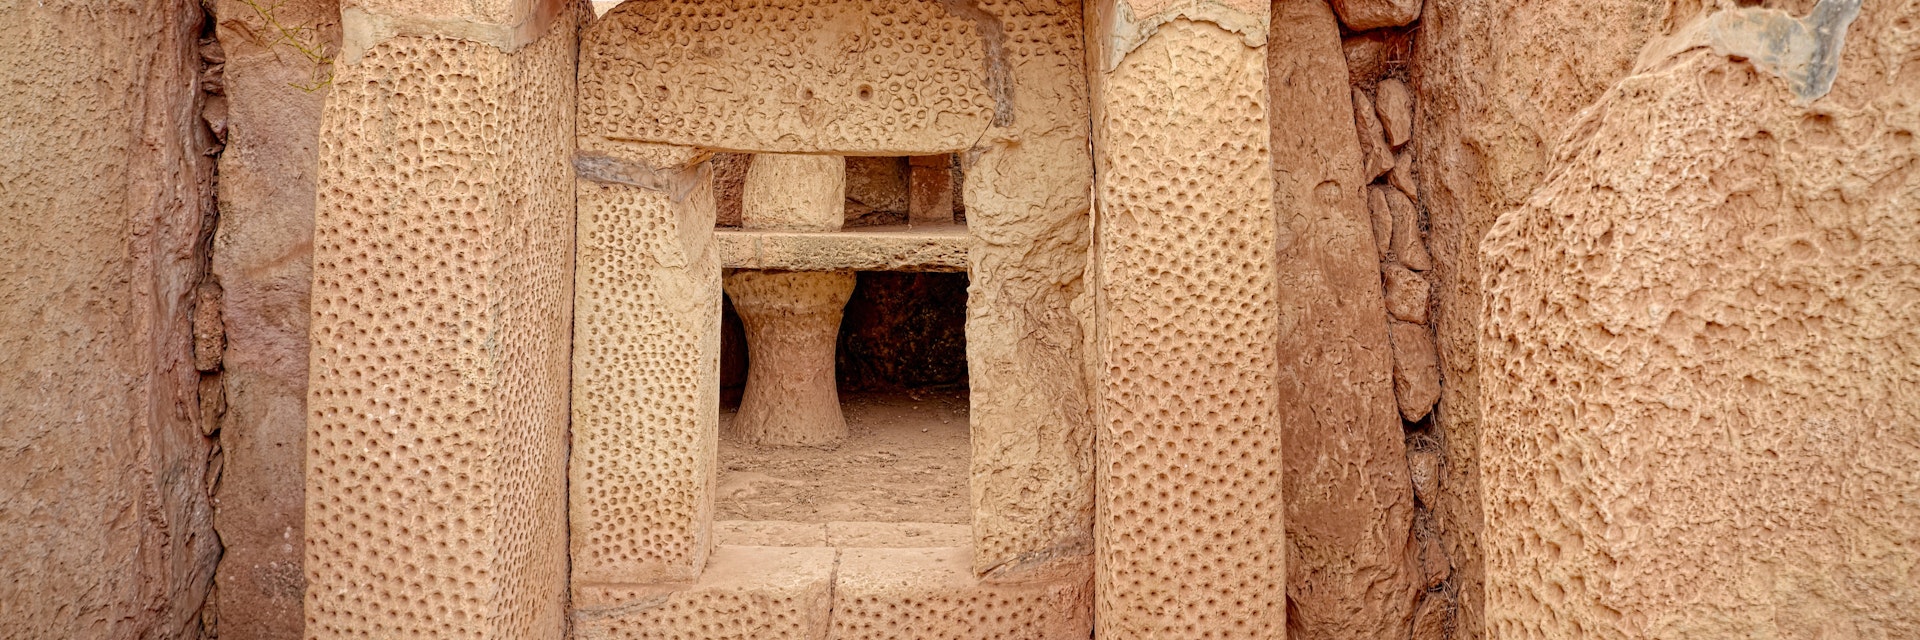 Details of Mnajdra megalithic temples of Malta (Qrendi)
